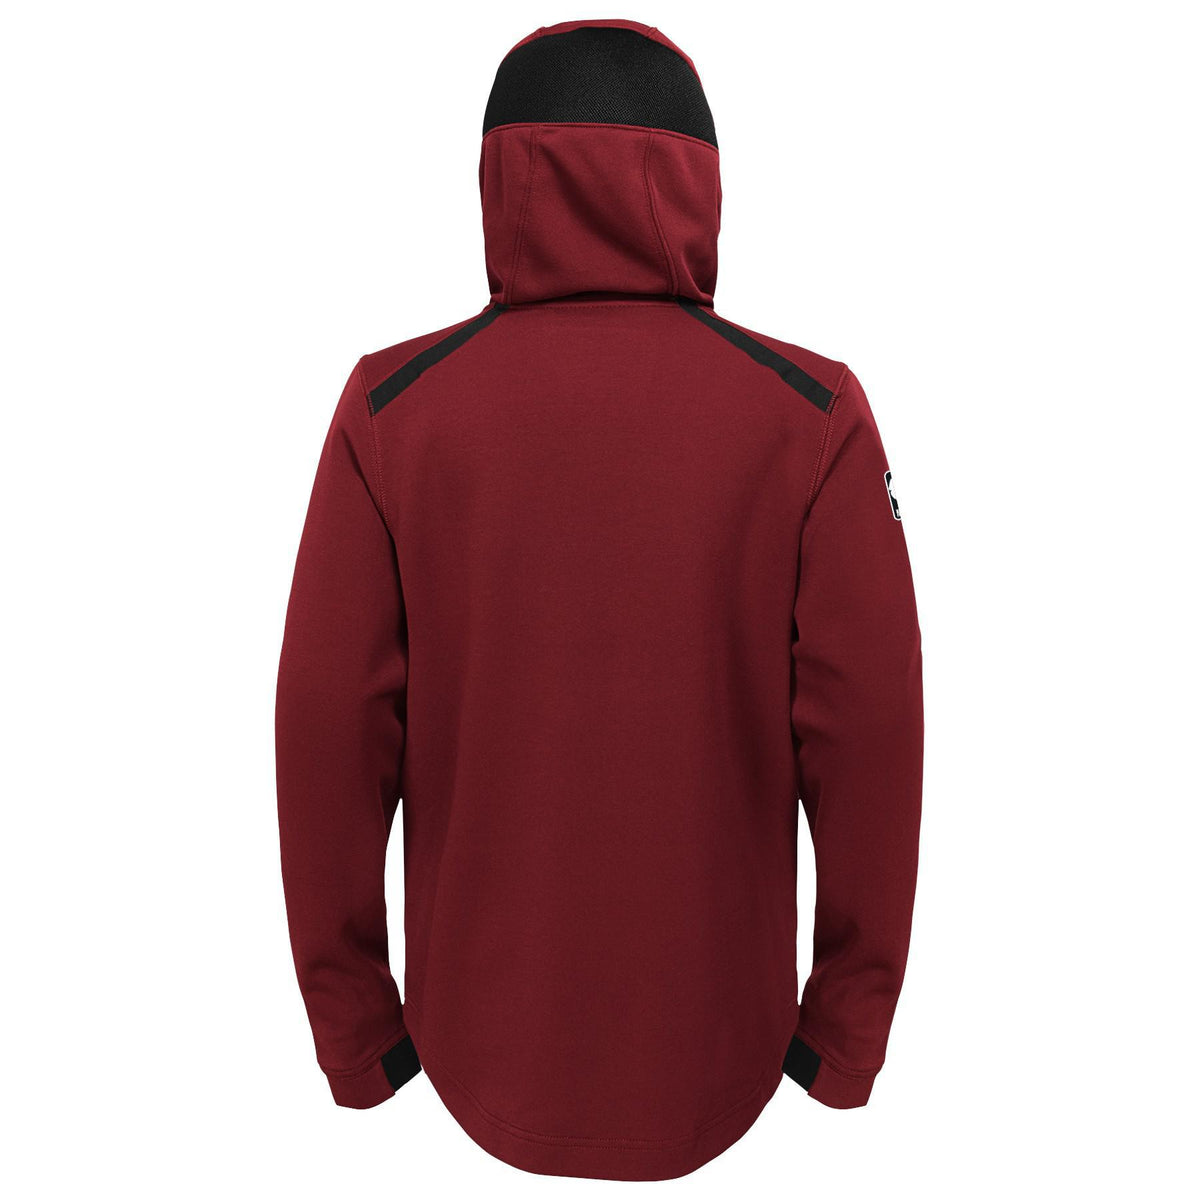 NIKE NBA CLEVELAND CAVALIERS DRY SHOWTIME HOODIE TEAM RED price €85.00